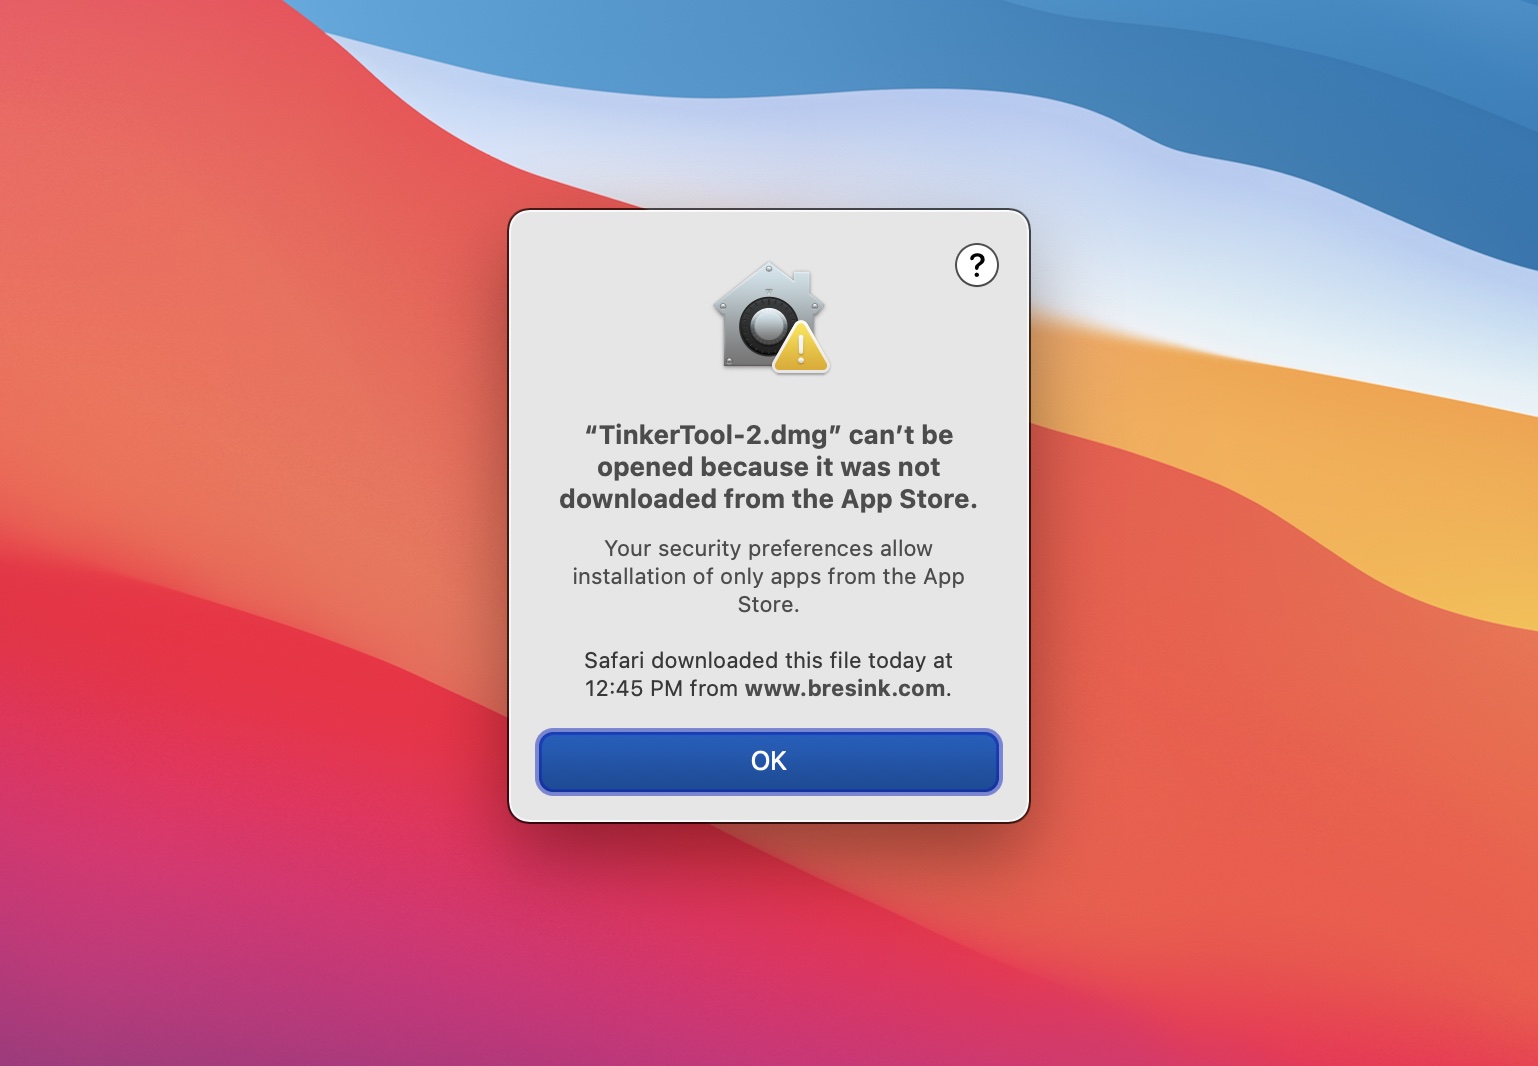 Fix Mac “App can’t be opened because it was not downloaded from the App Store” Error